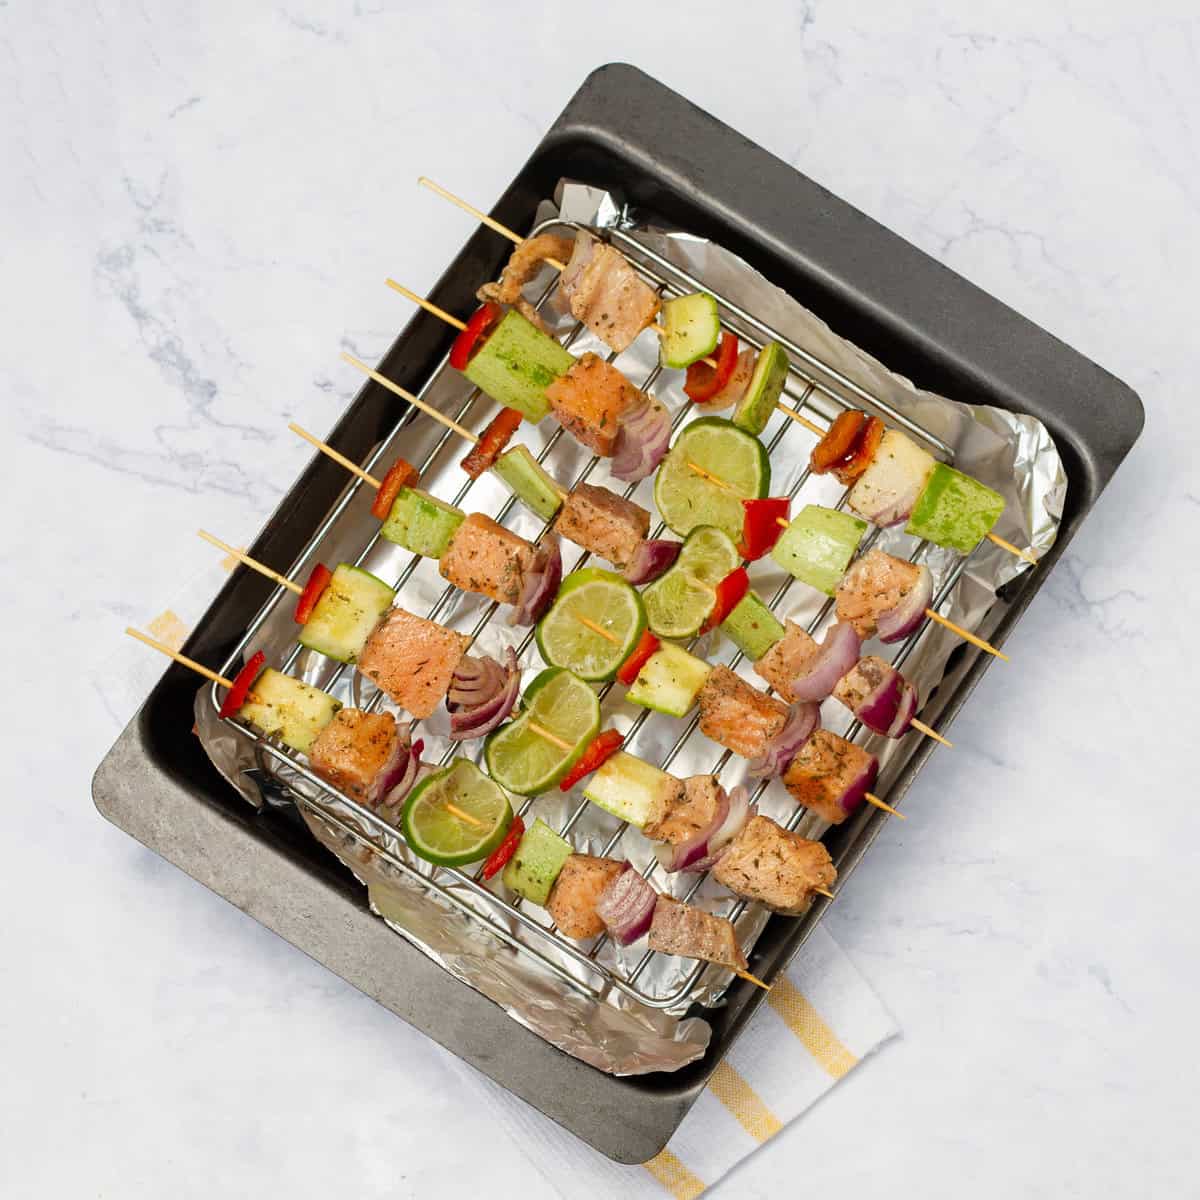 Skewers on backing tray for grilling